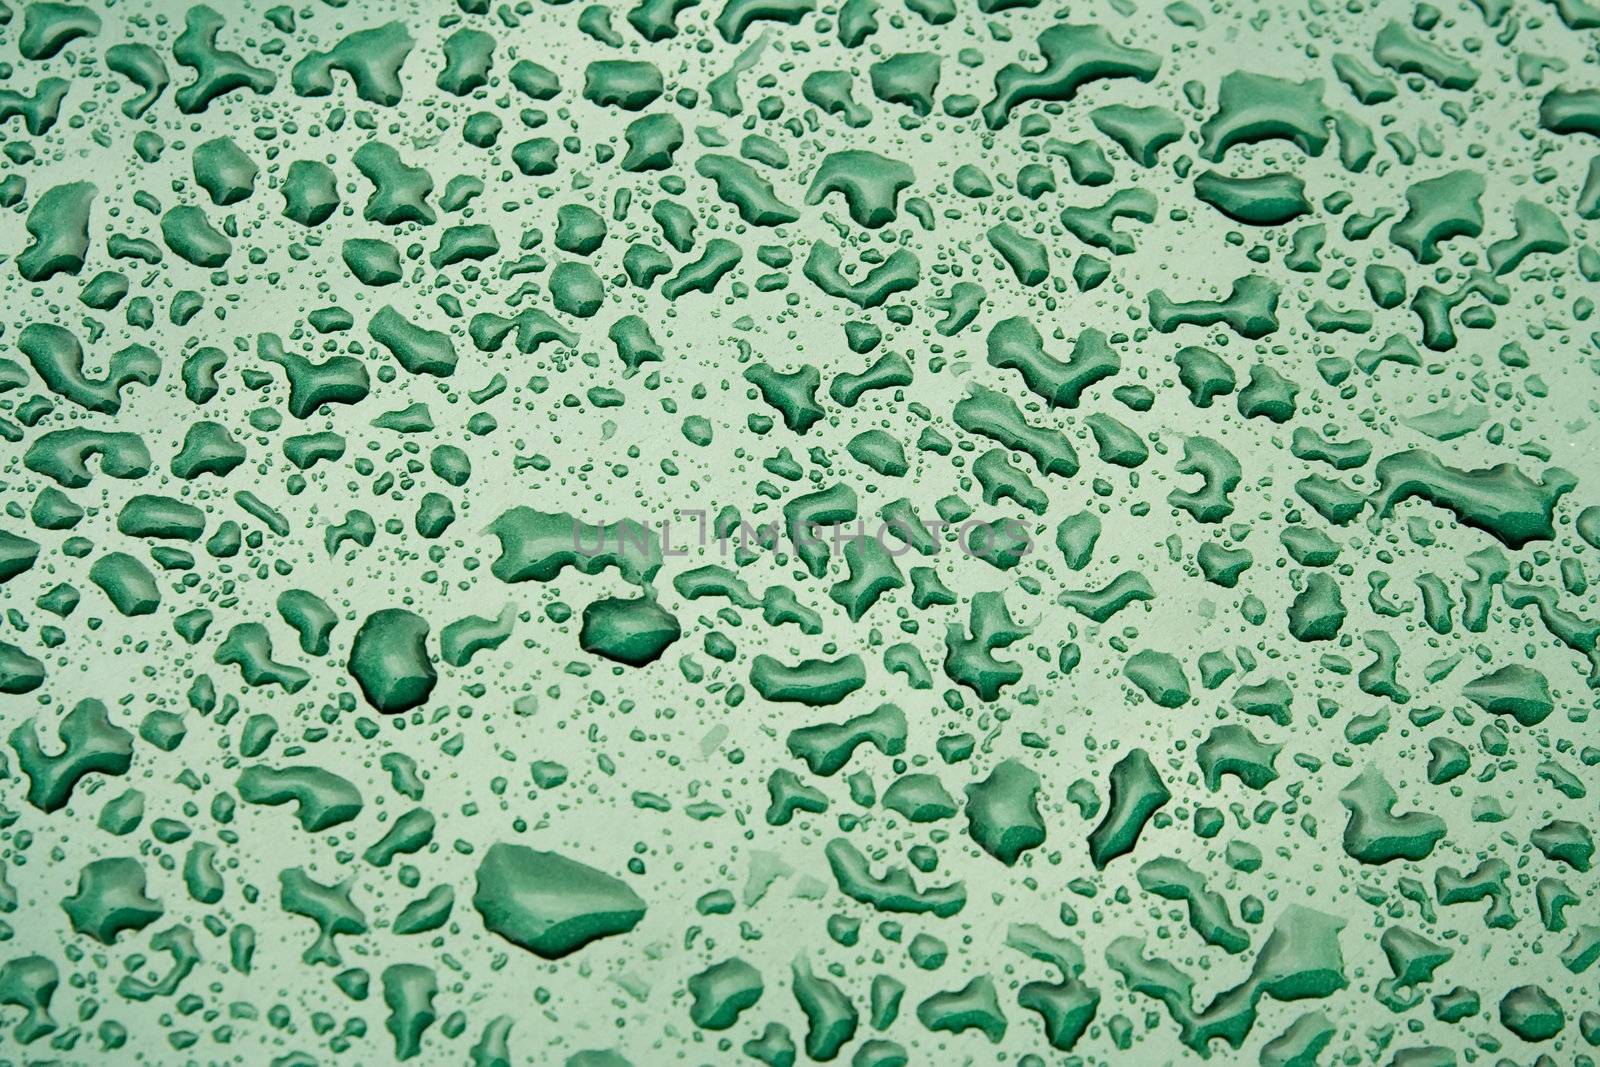 Water Droplets on a Green Steel Surface. Close-up